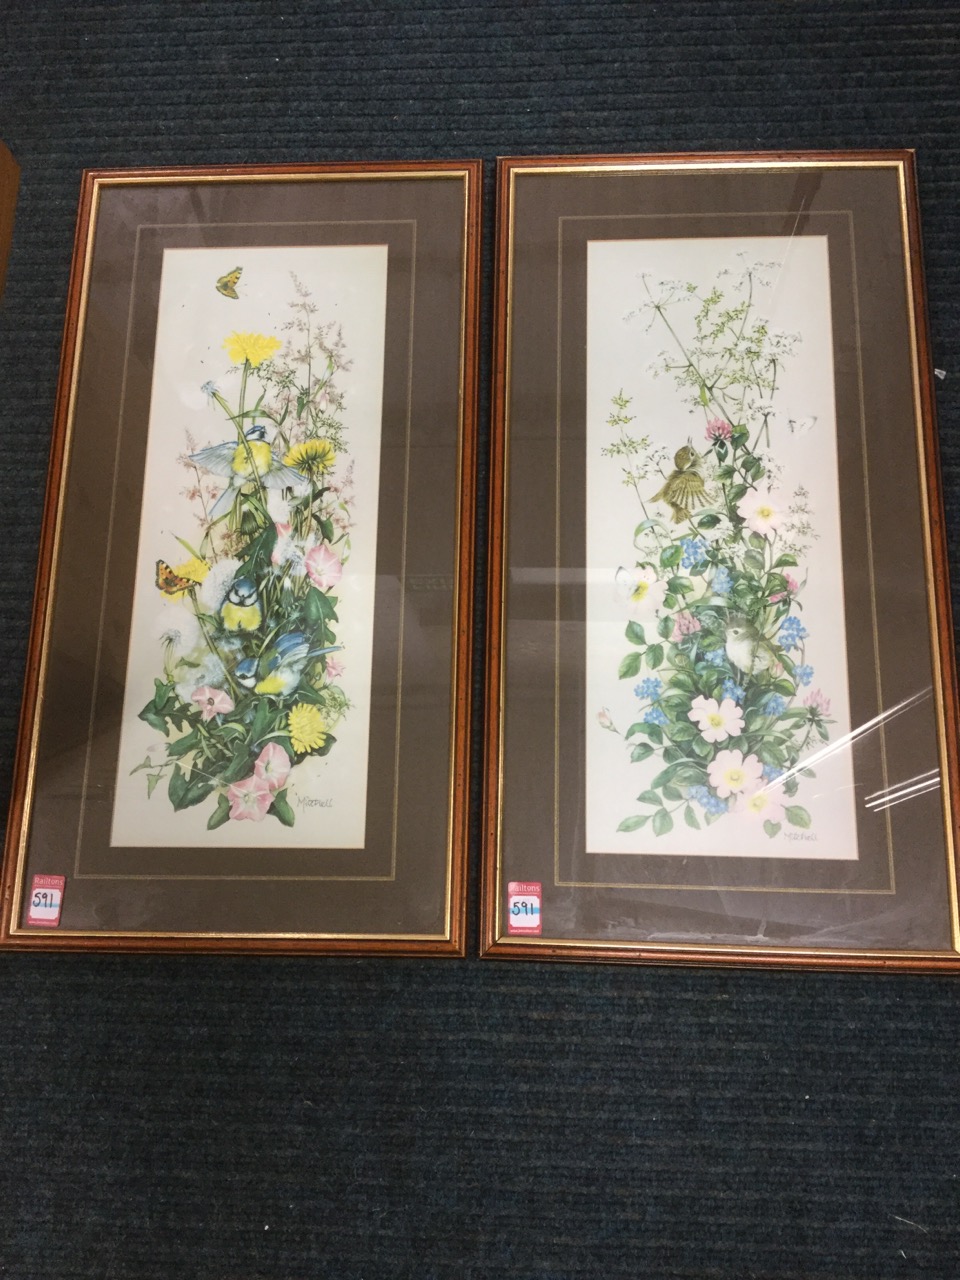 A pair of Mitchell prints of birds, butterflies & flowers, signed, mounted & framed. (2)